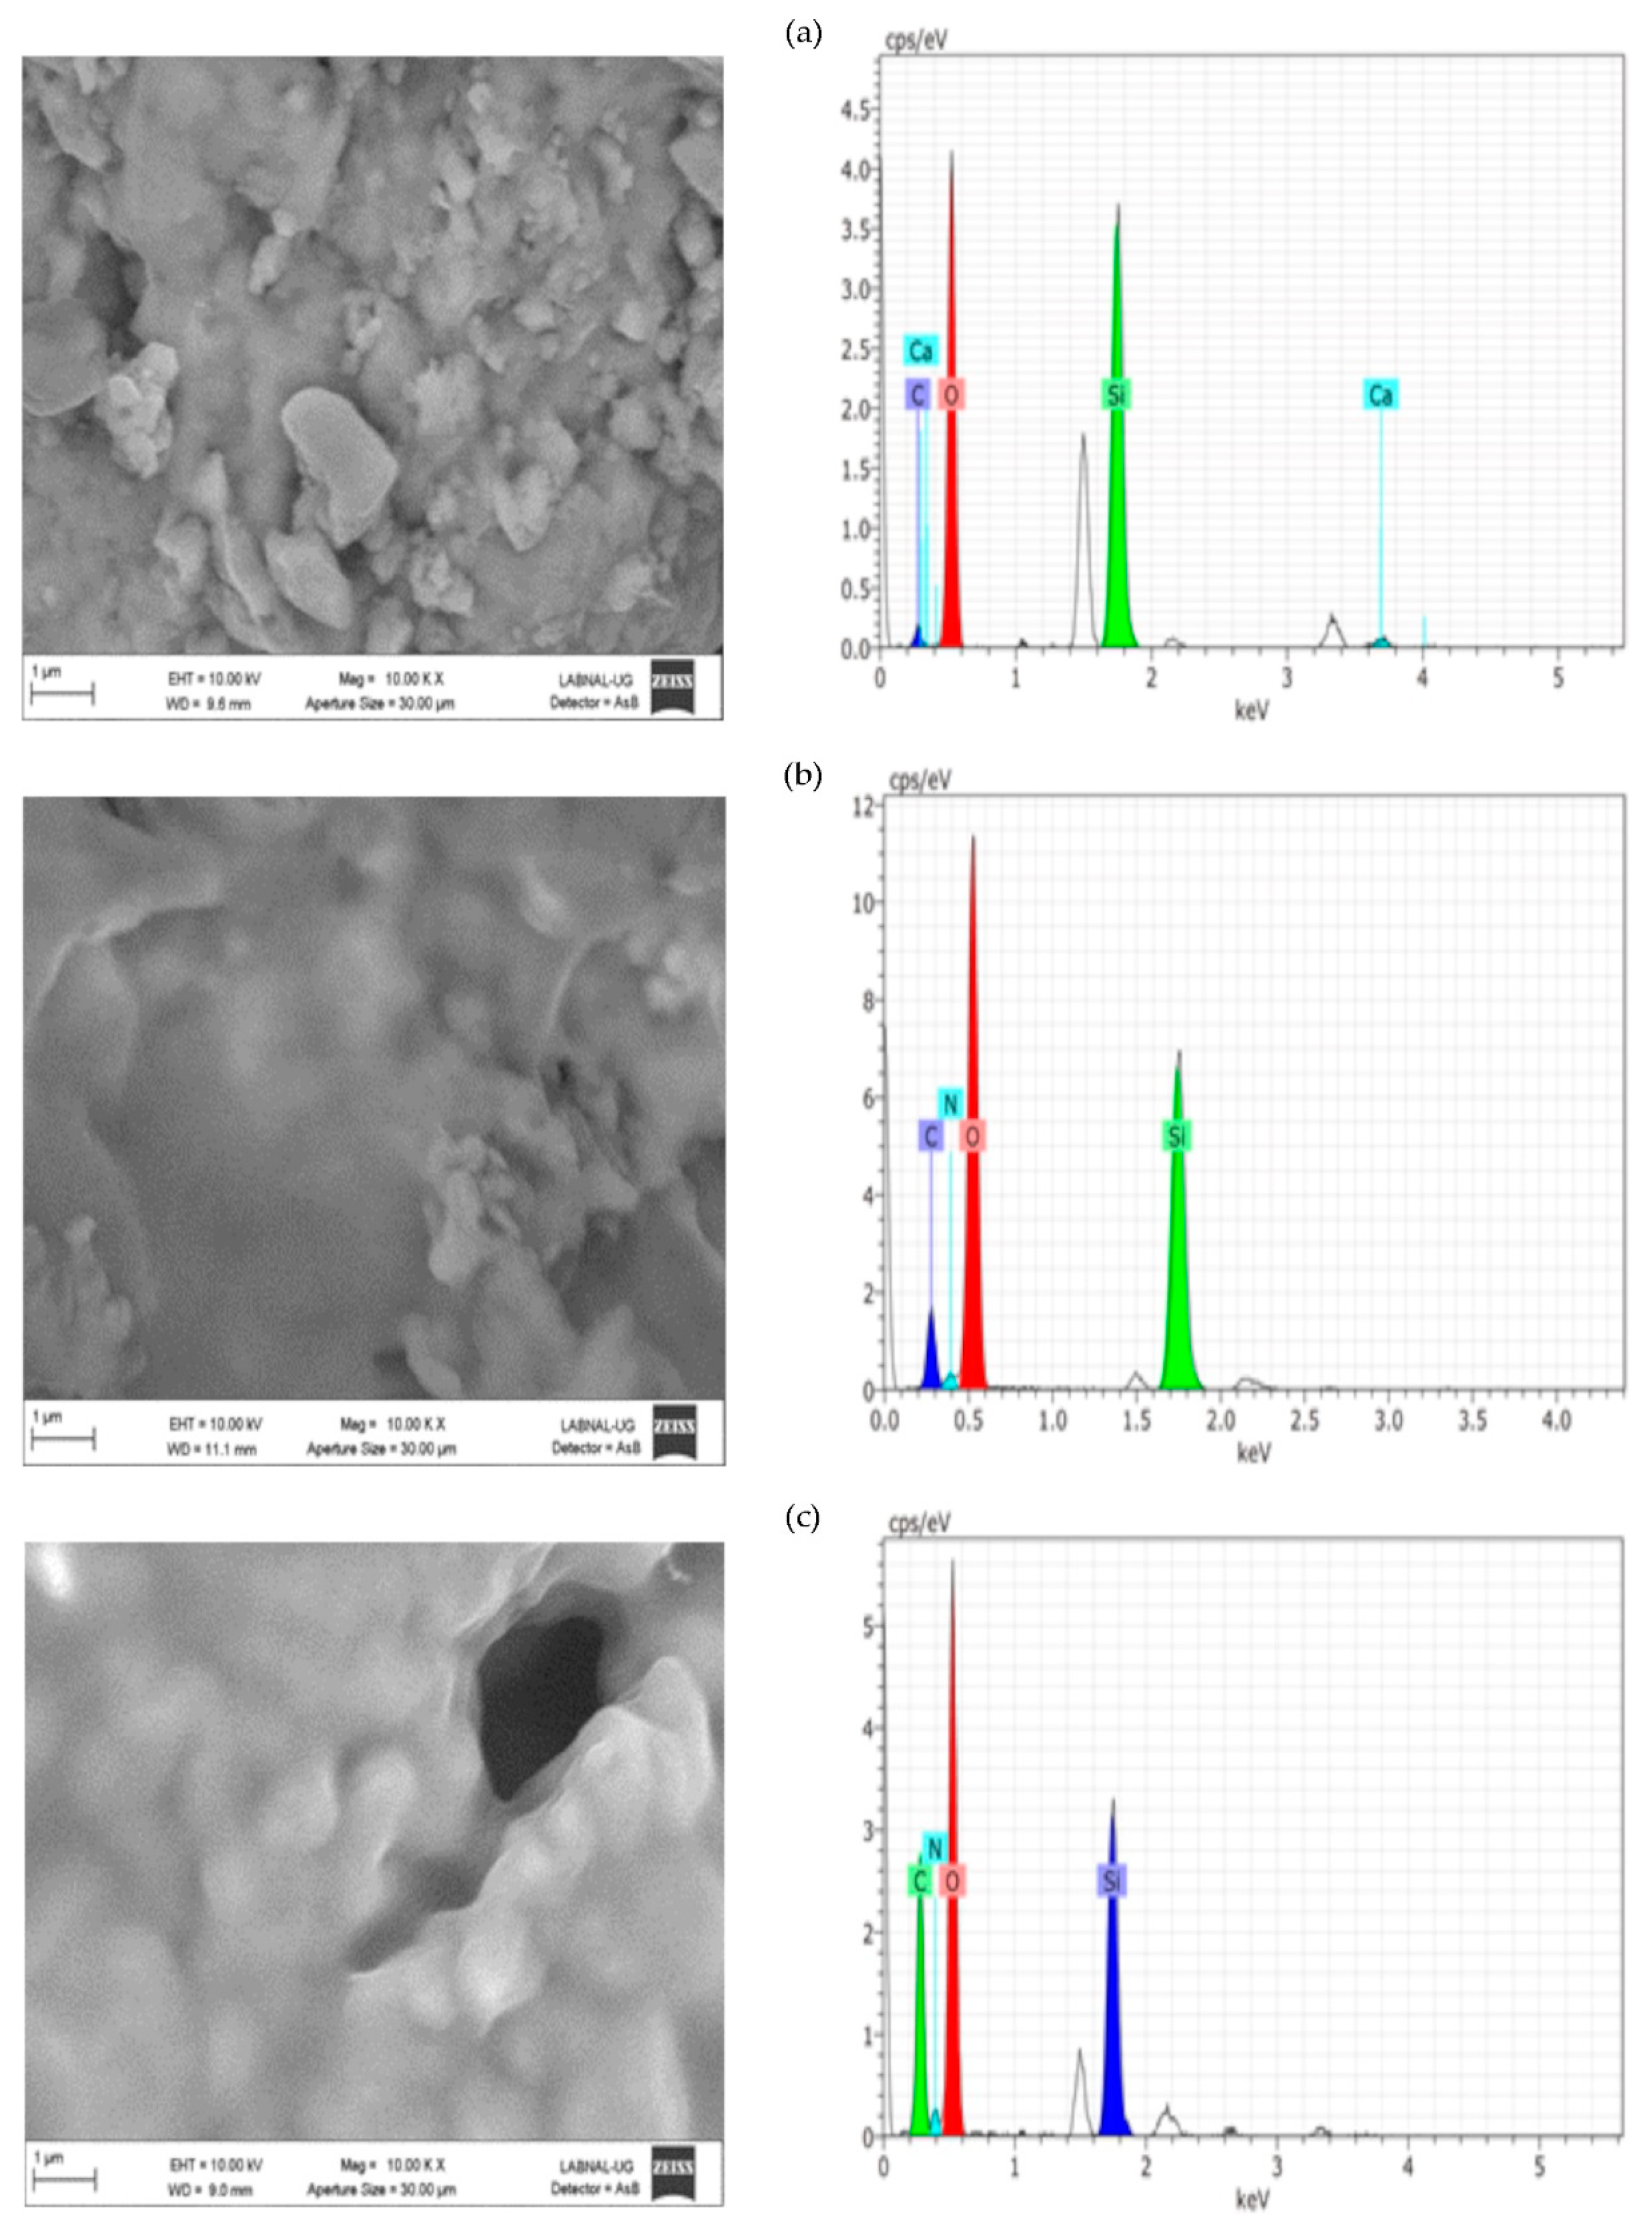 Molecules | Free Full-Text | An Approach to the Use of Glycol  Alkoxysilane–Polysaccharide Hybrids in the Conservation of Historical  Building Stones | HTML